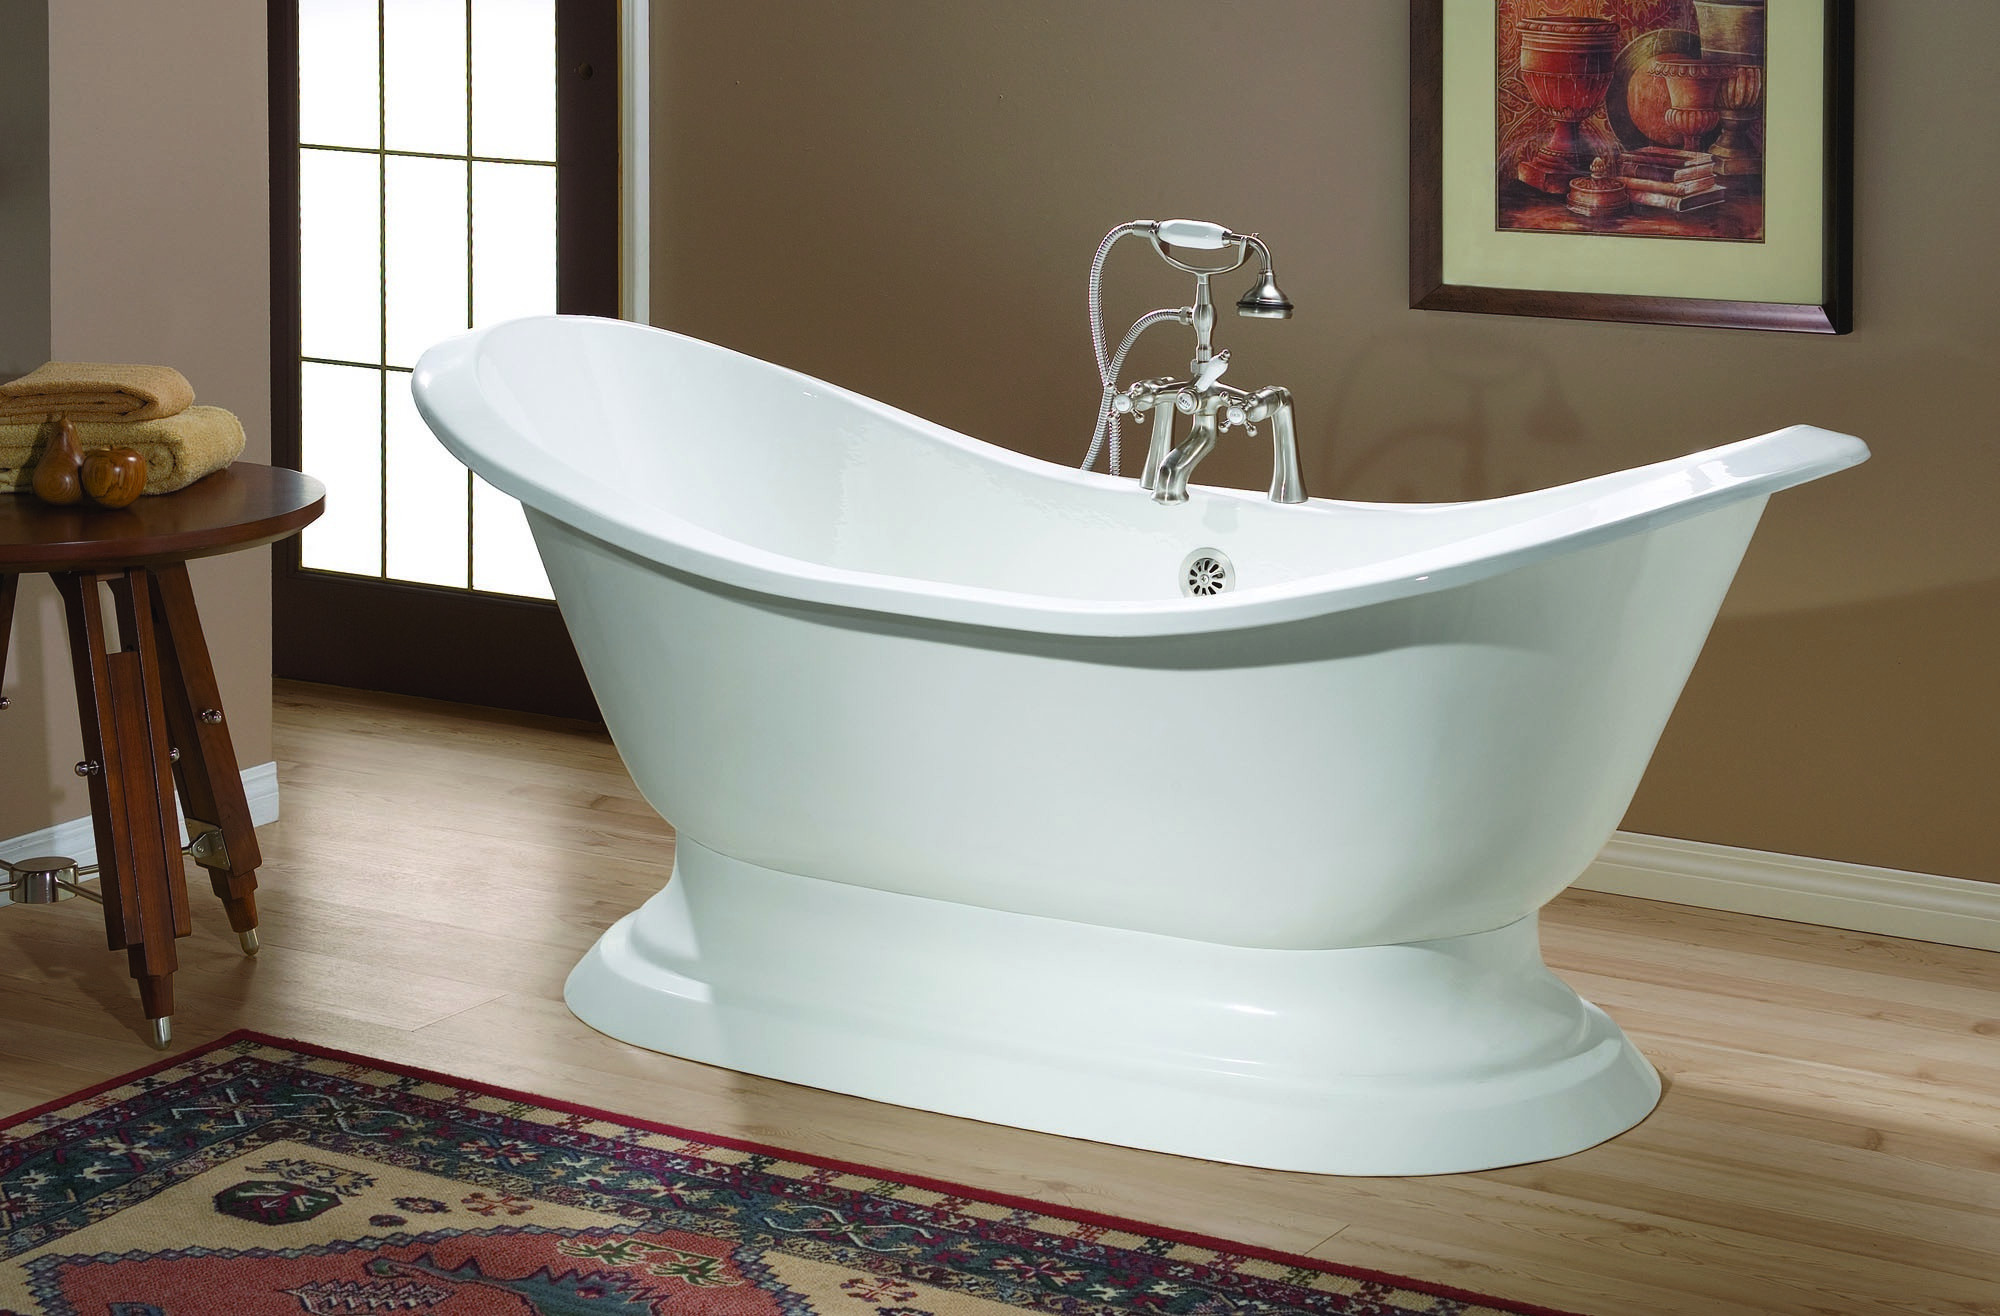 Cheviot 2151-BB-0 Regency Cast Iron Oval Bathtub in Biscuit with Pedestal Base